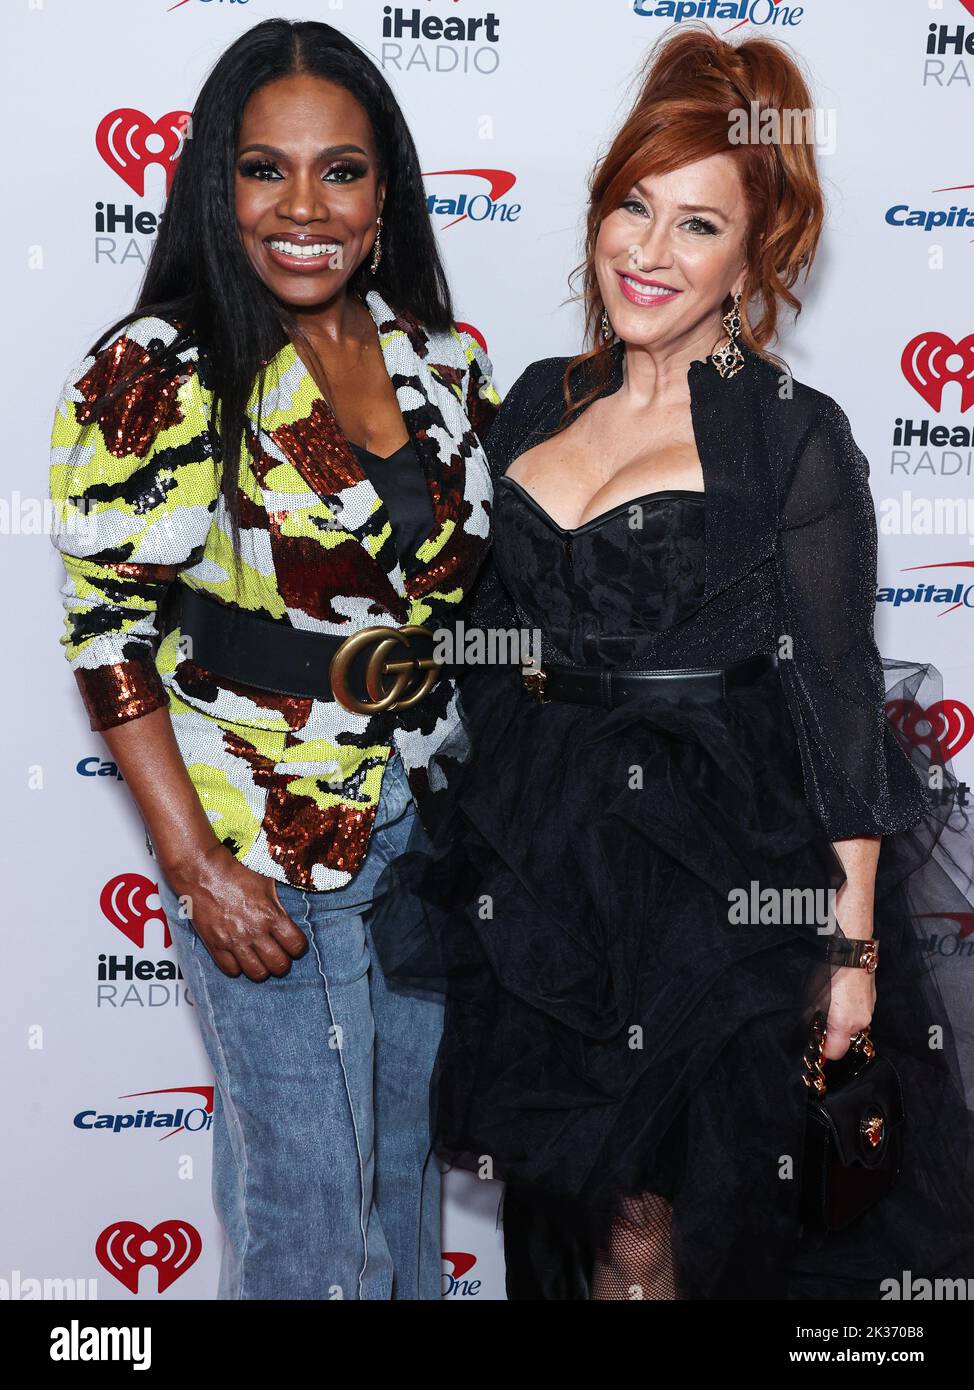 Las Vegas, United States. 24th Sep, 2022. LAS VEGAS, NEVADA, USA - SEPTEMBER 24: Sheryl Lee Ralph and Lisa Ann Walter pose in the press room at the 2022 iHeartRadio Music Festival - Night 2 held at the T-Mobile Arena on September 24, 2022 in Las Vegas, Nevada, United States. (Photo by Xavier Collin/Image Press Agency) Credit: Image Press Agency/Alamy Live News Stock Photo